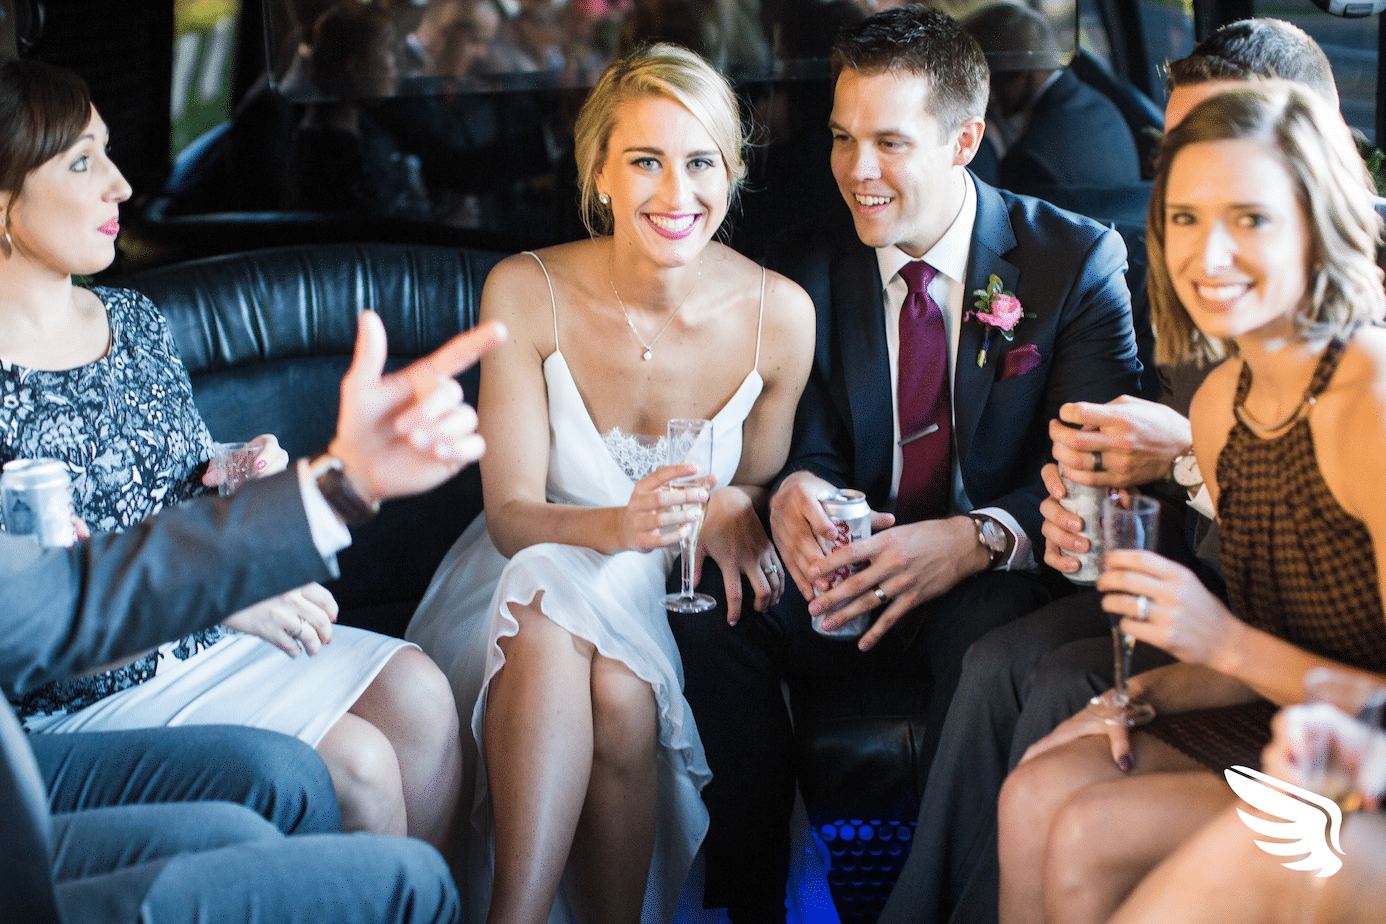 People in formal clothes drinking champagne in a skedaddle limo-like bus